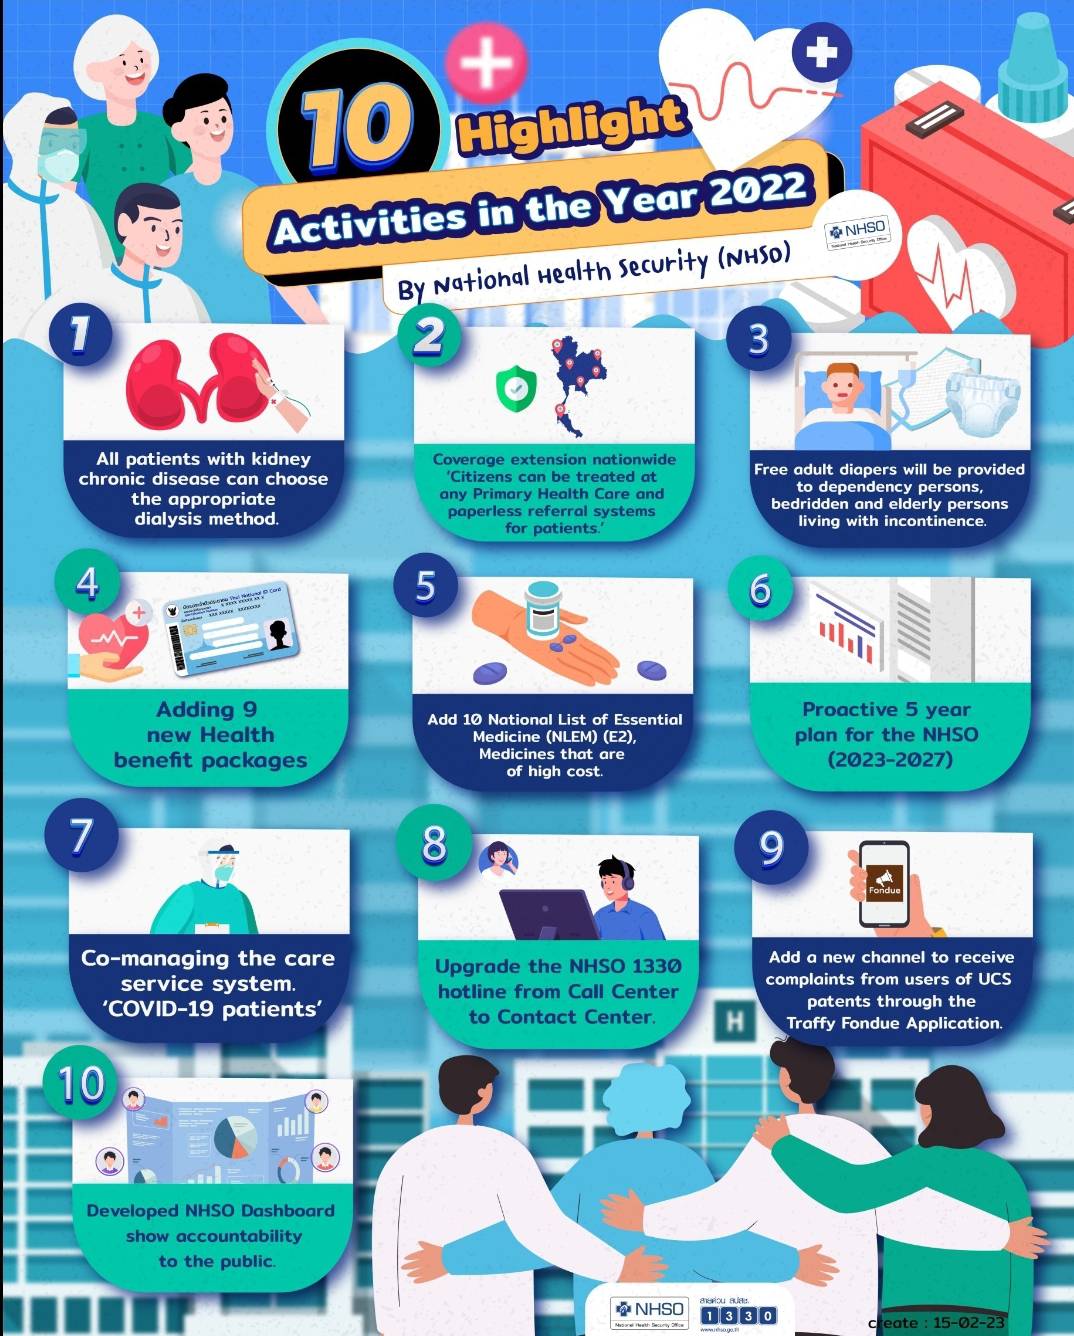 10 Highlight Activities in the Year 2022 By National Health Security (NHSO)